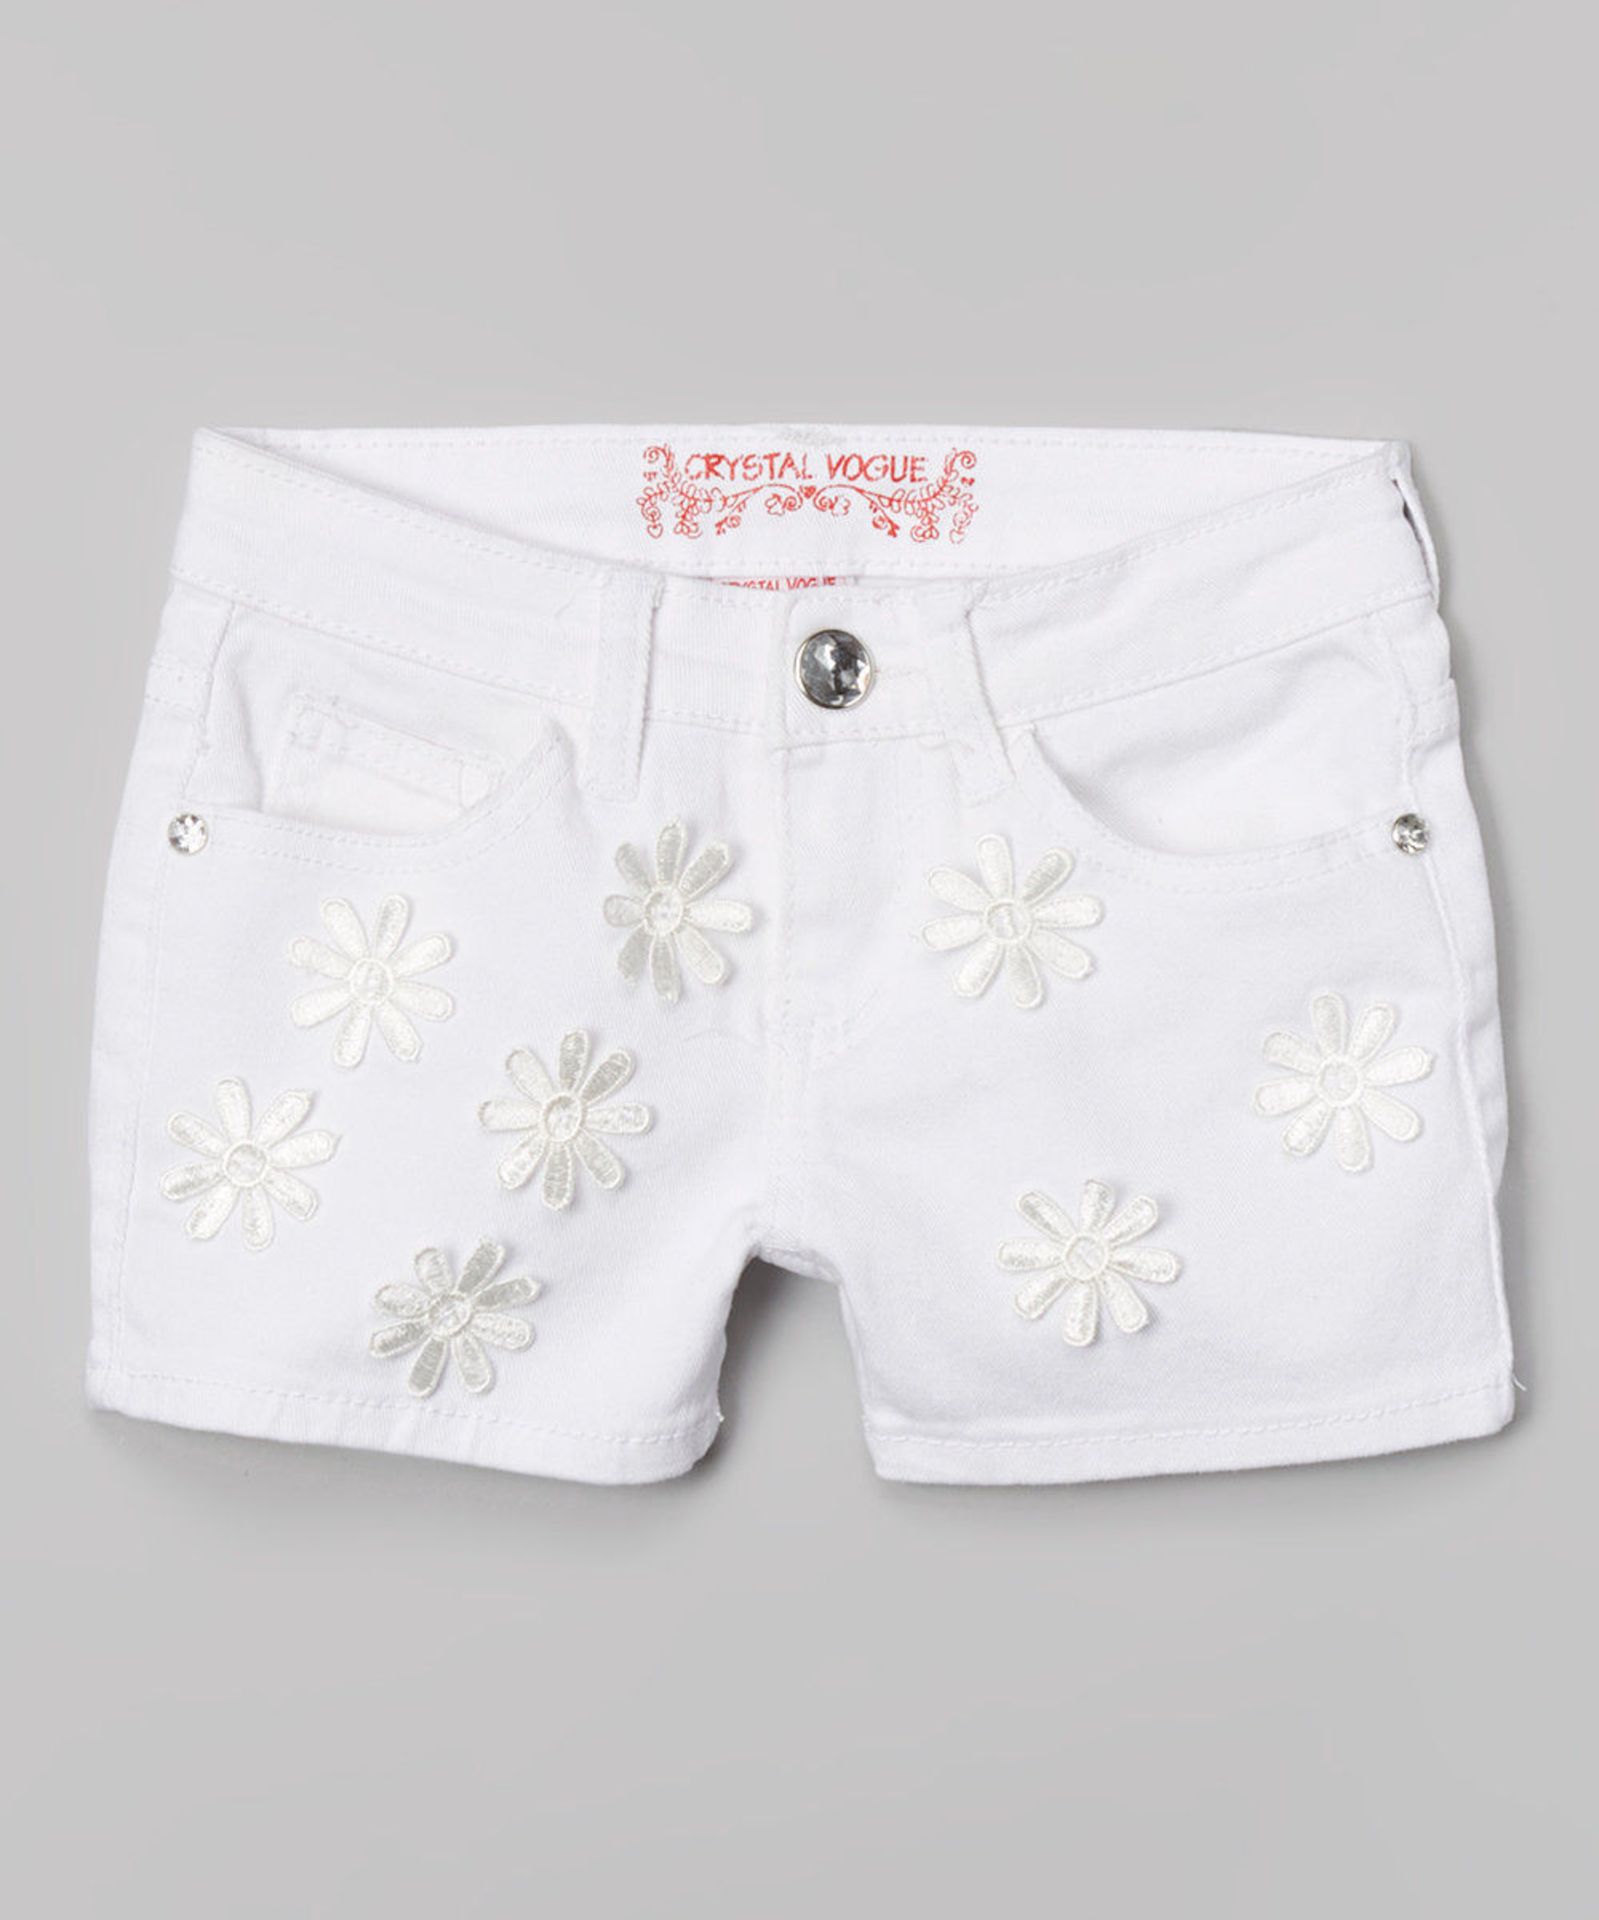 Crystal Vogue, White Floral Embroidered Denim Shorts - Girls, Size 14 Years (New with tags) [Ref: